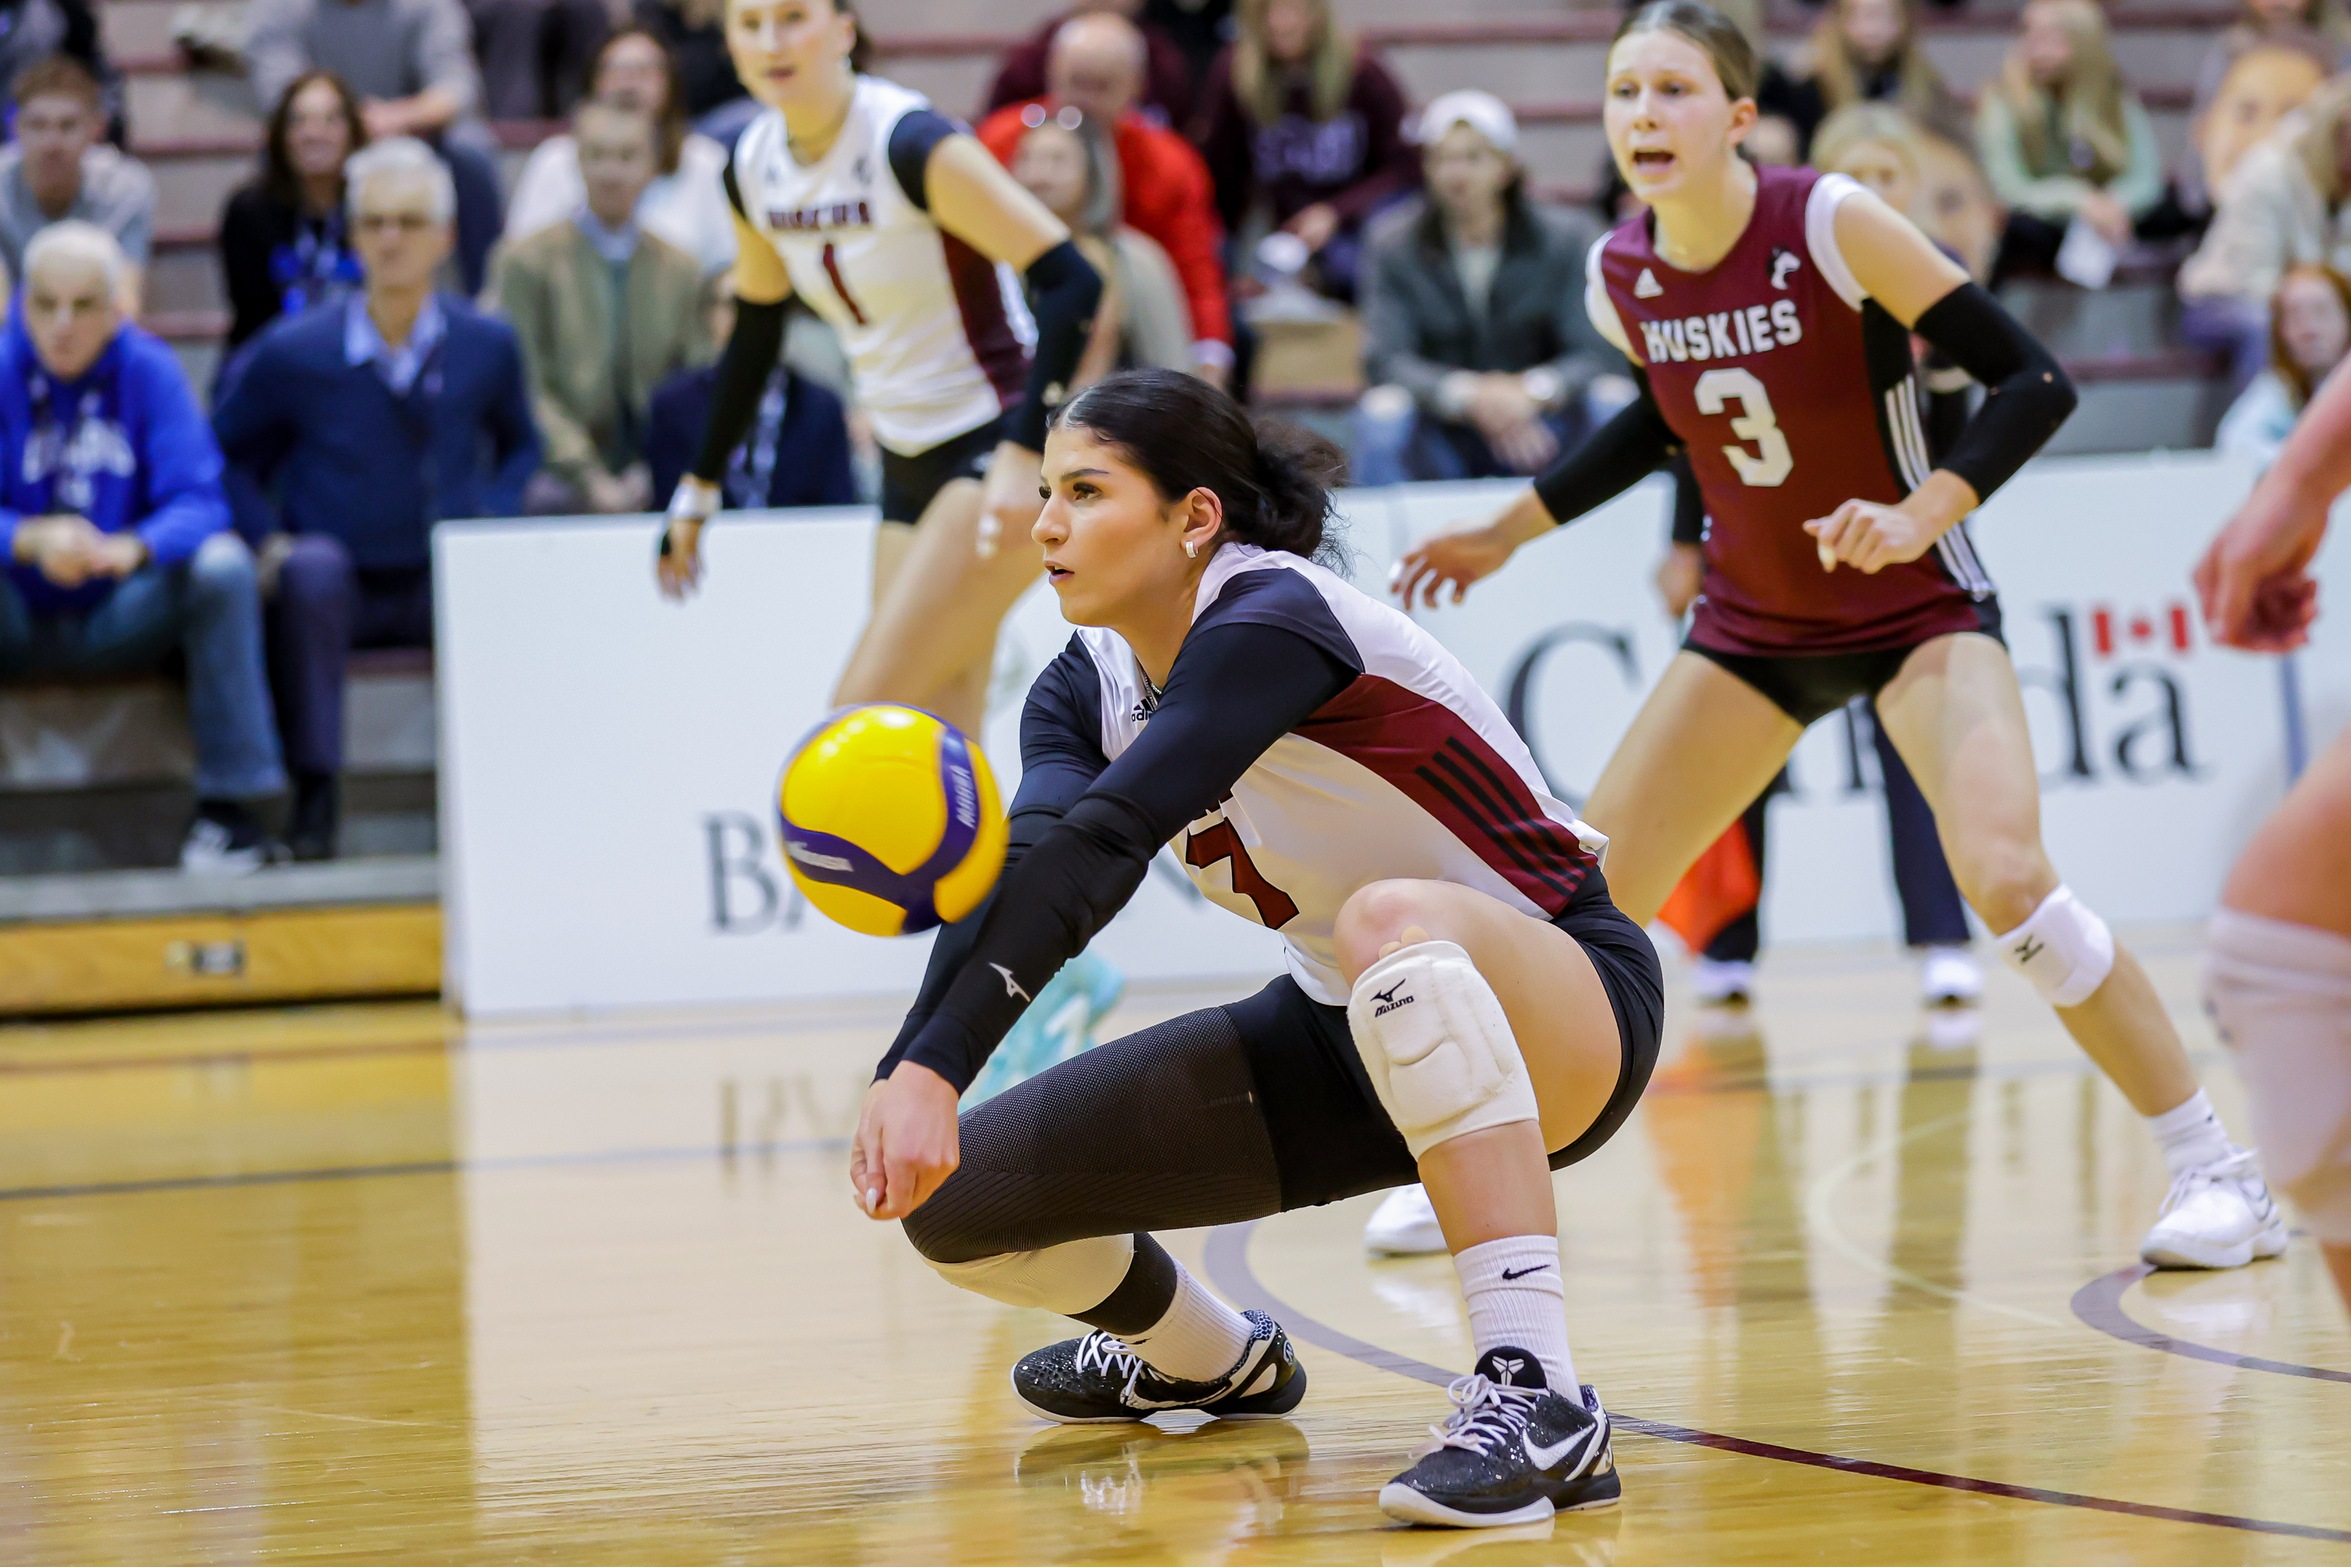 Huskies advance to consolation final with four set win over Carabins